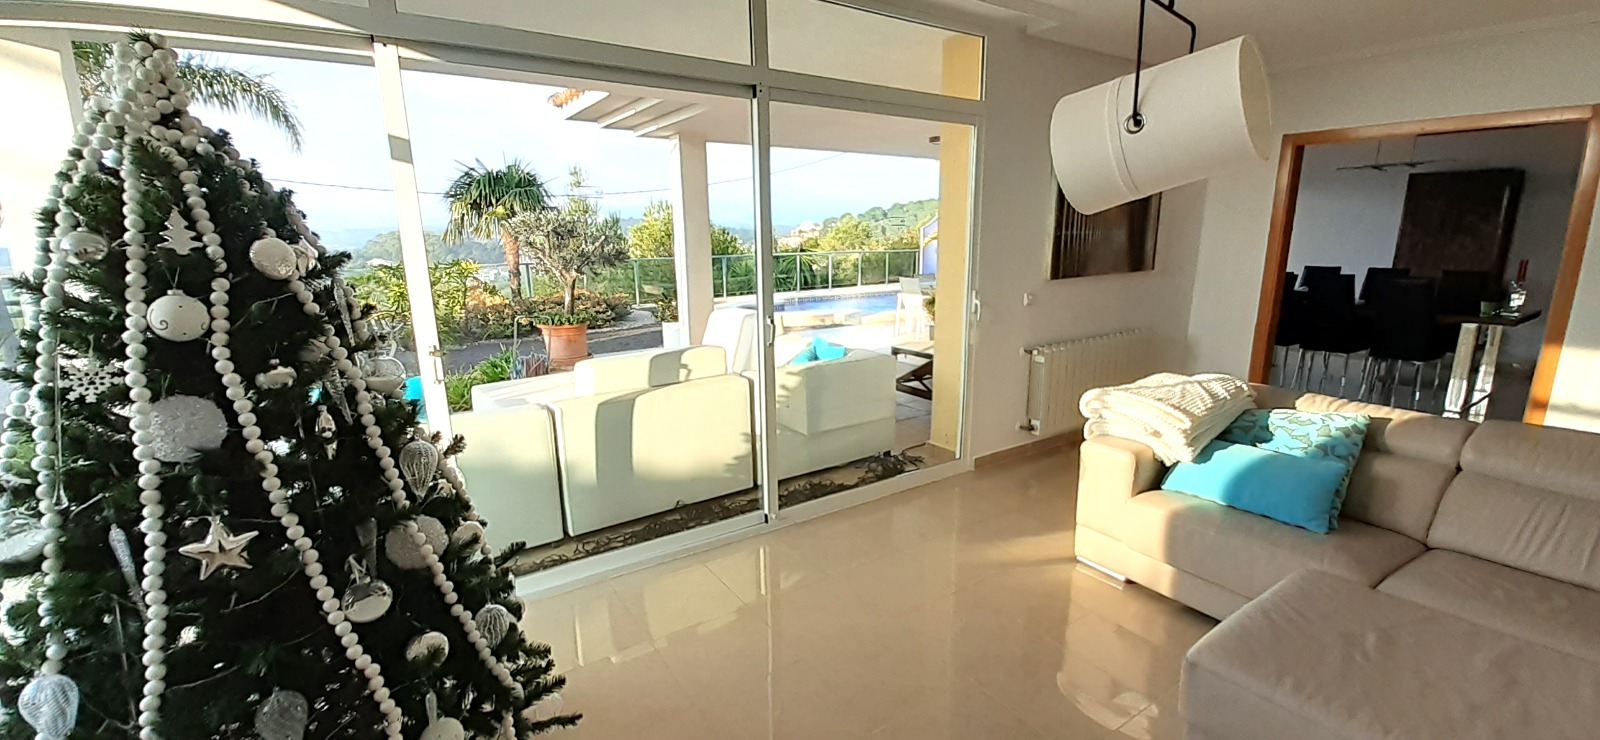 Charming Villa in Altea with Incredible Sea Views: Discover your Ideal Home